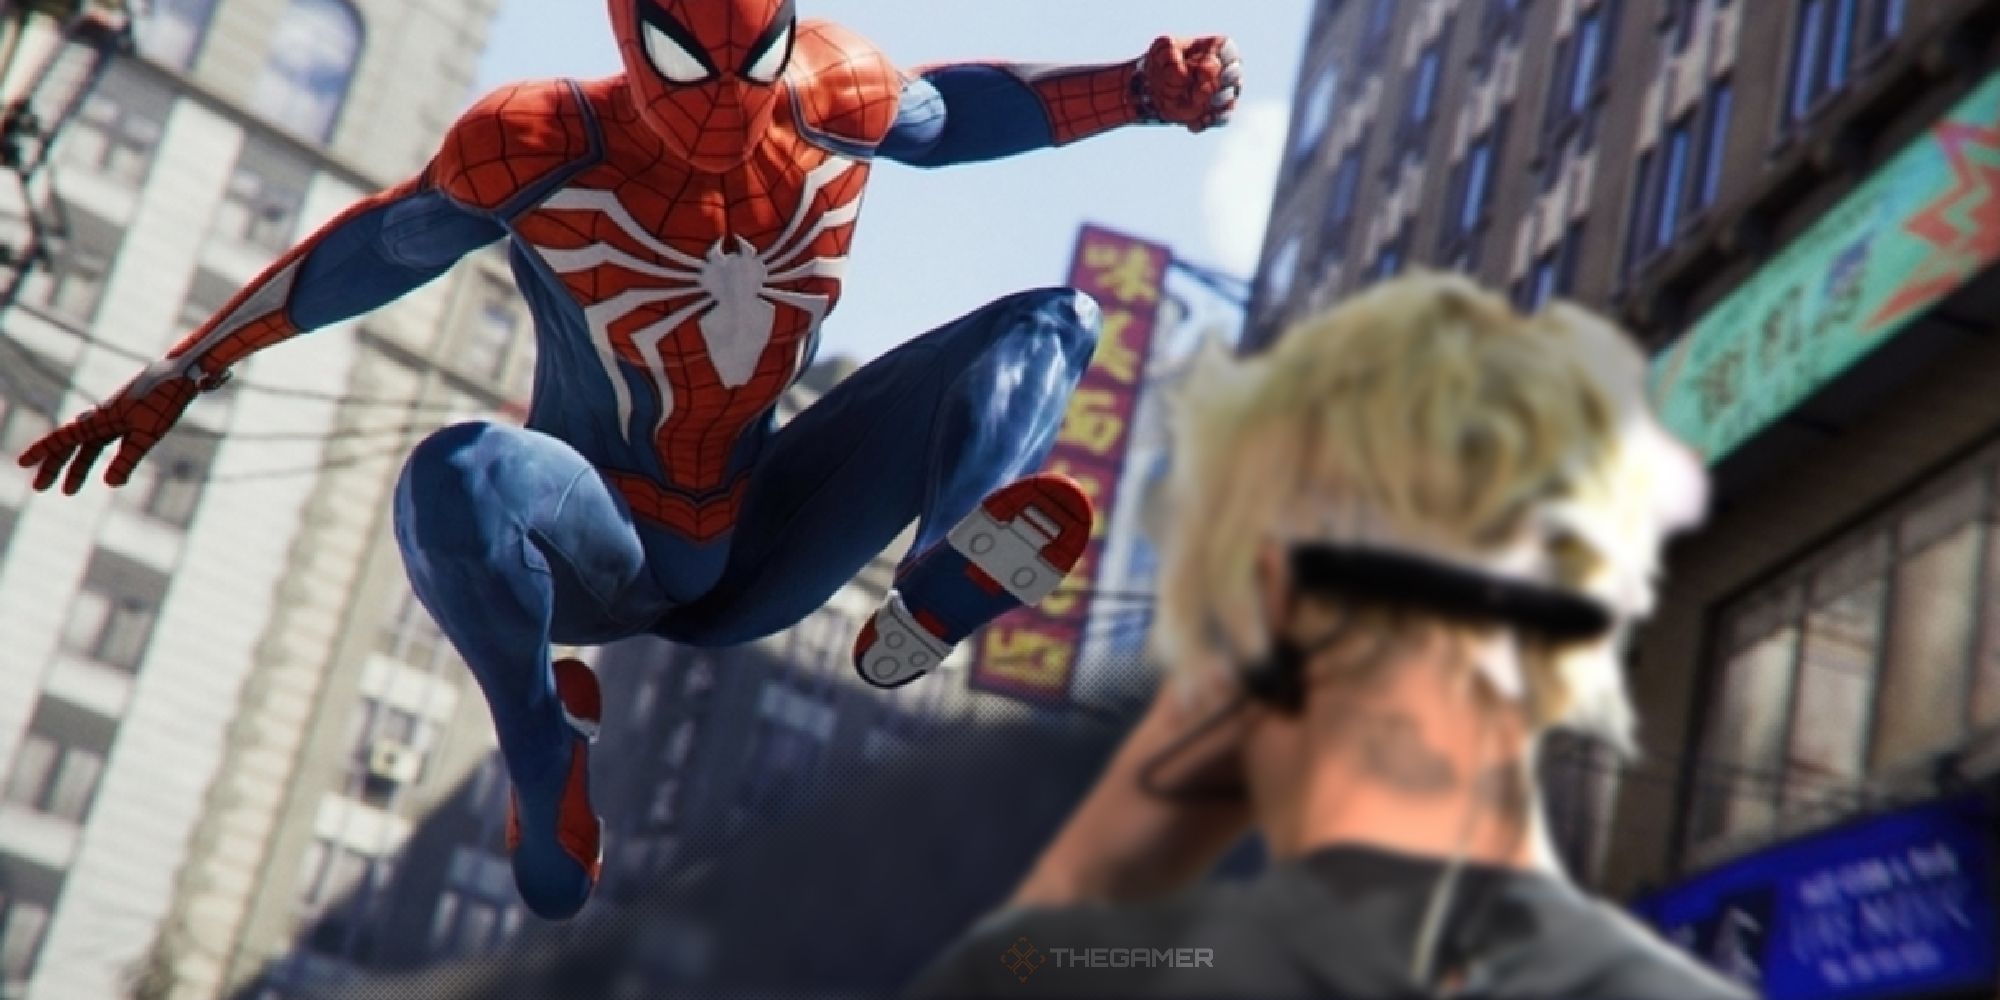 spider-man ps4 jumping towards bieber with his back turned